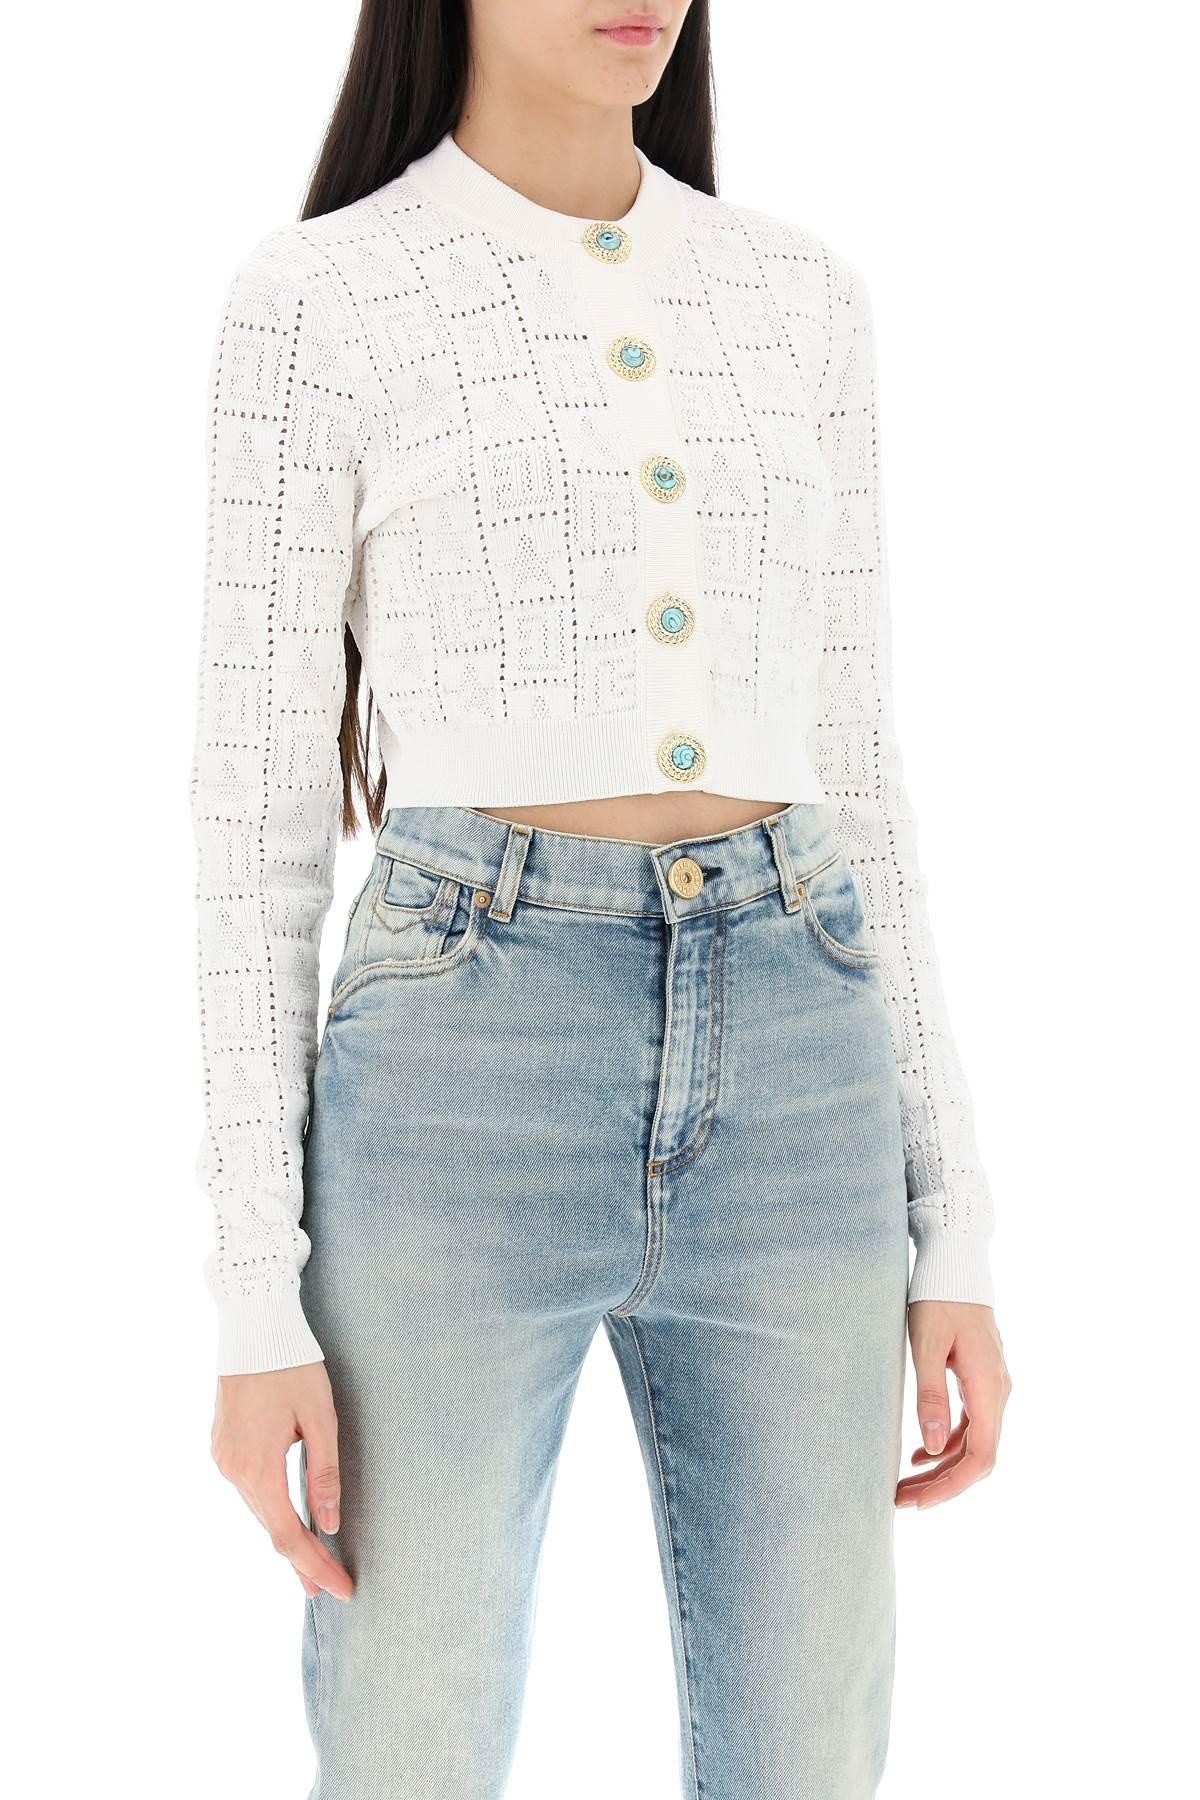 Balmain Cropped Cardigan With Jewel Buttons - 3